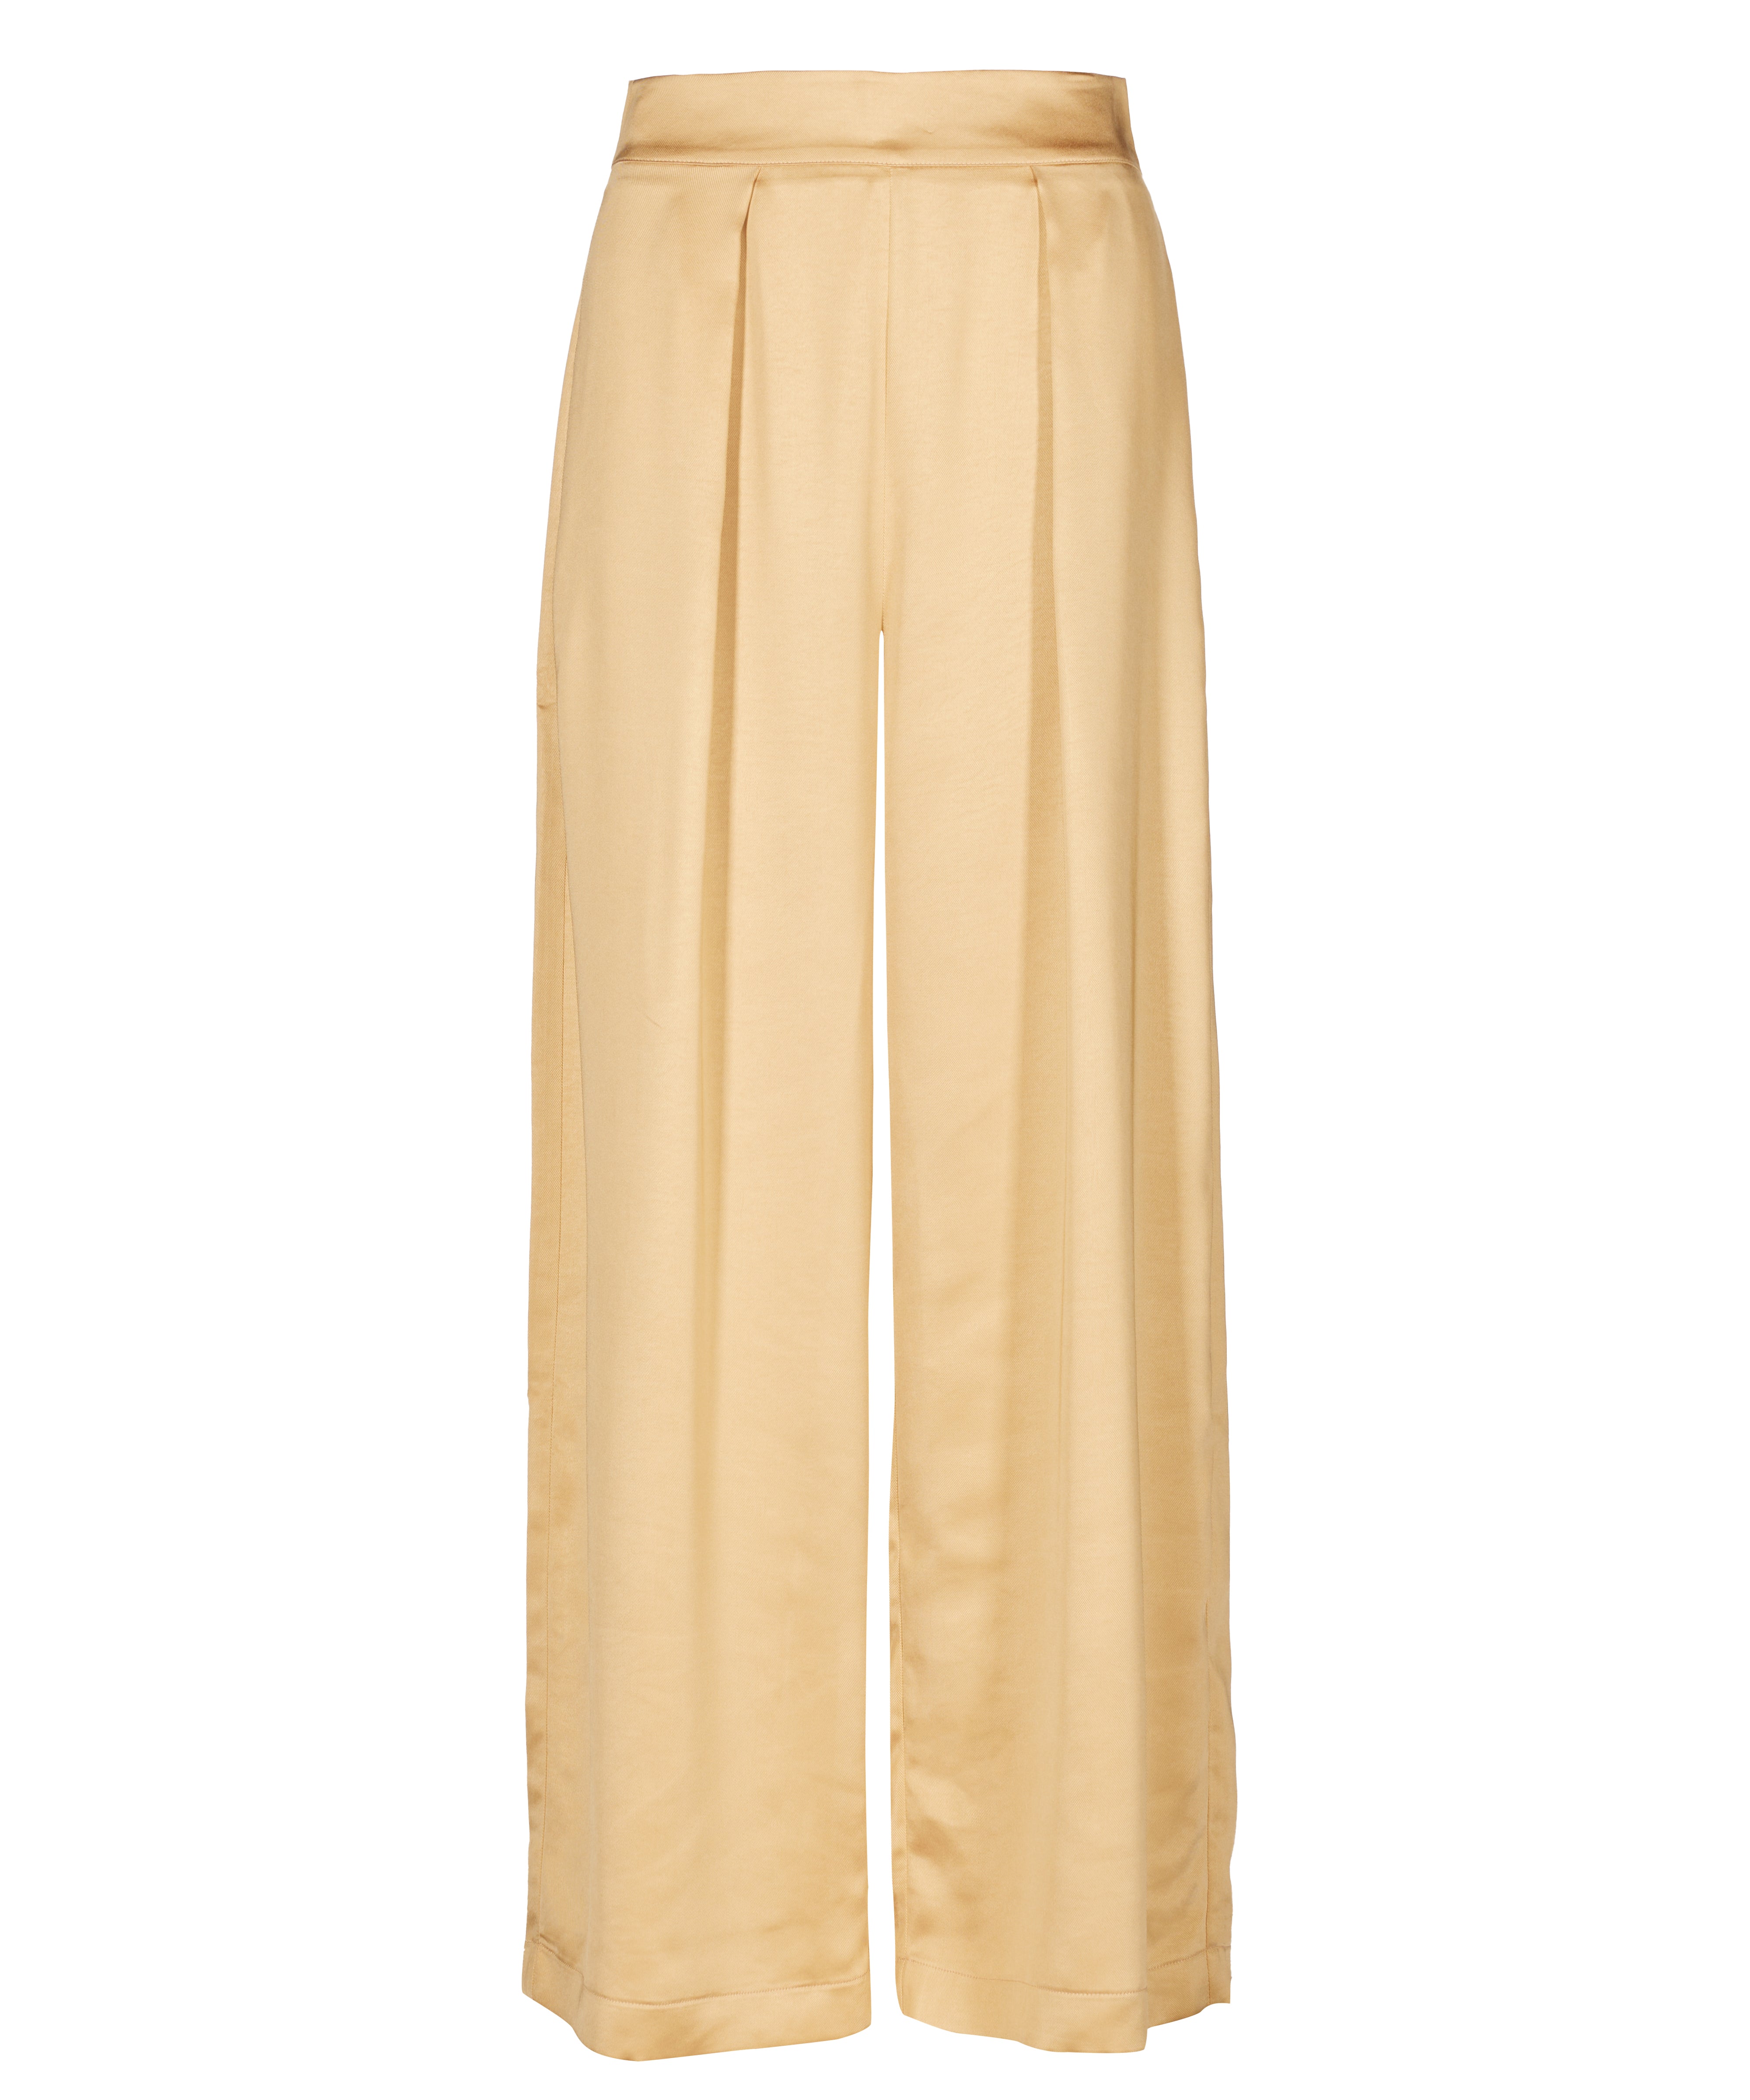 Tessitura Women's Large Gold Trousers